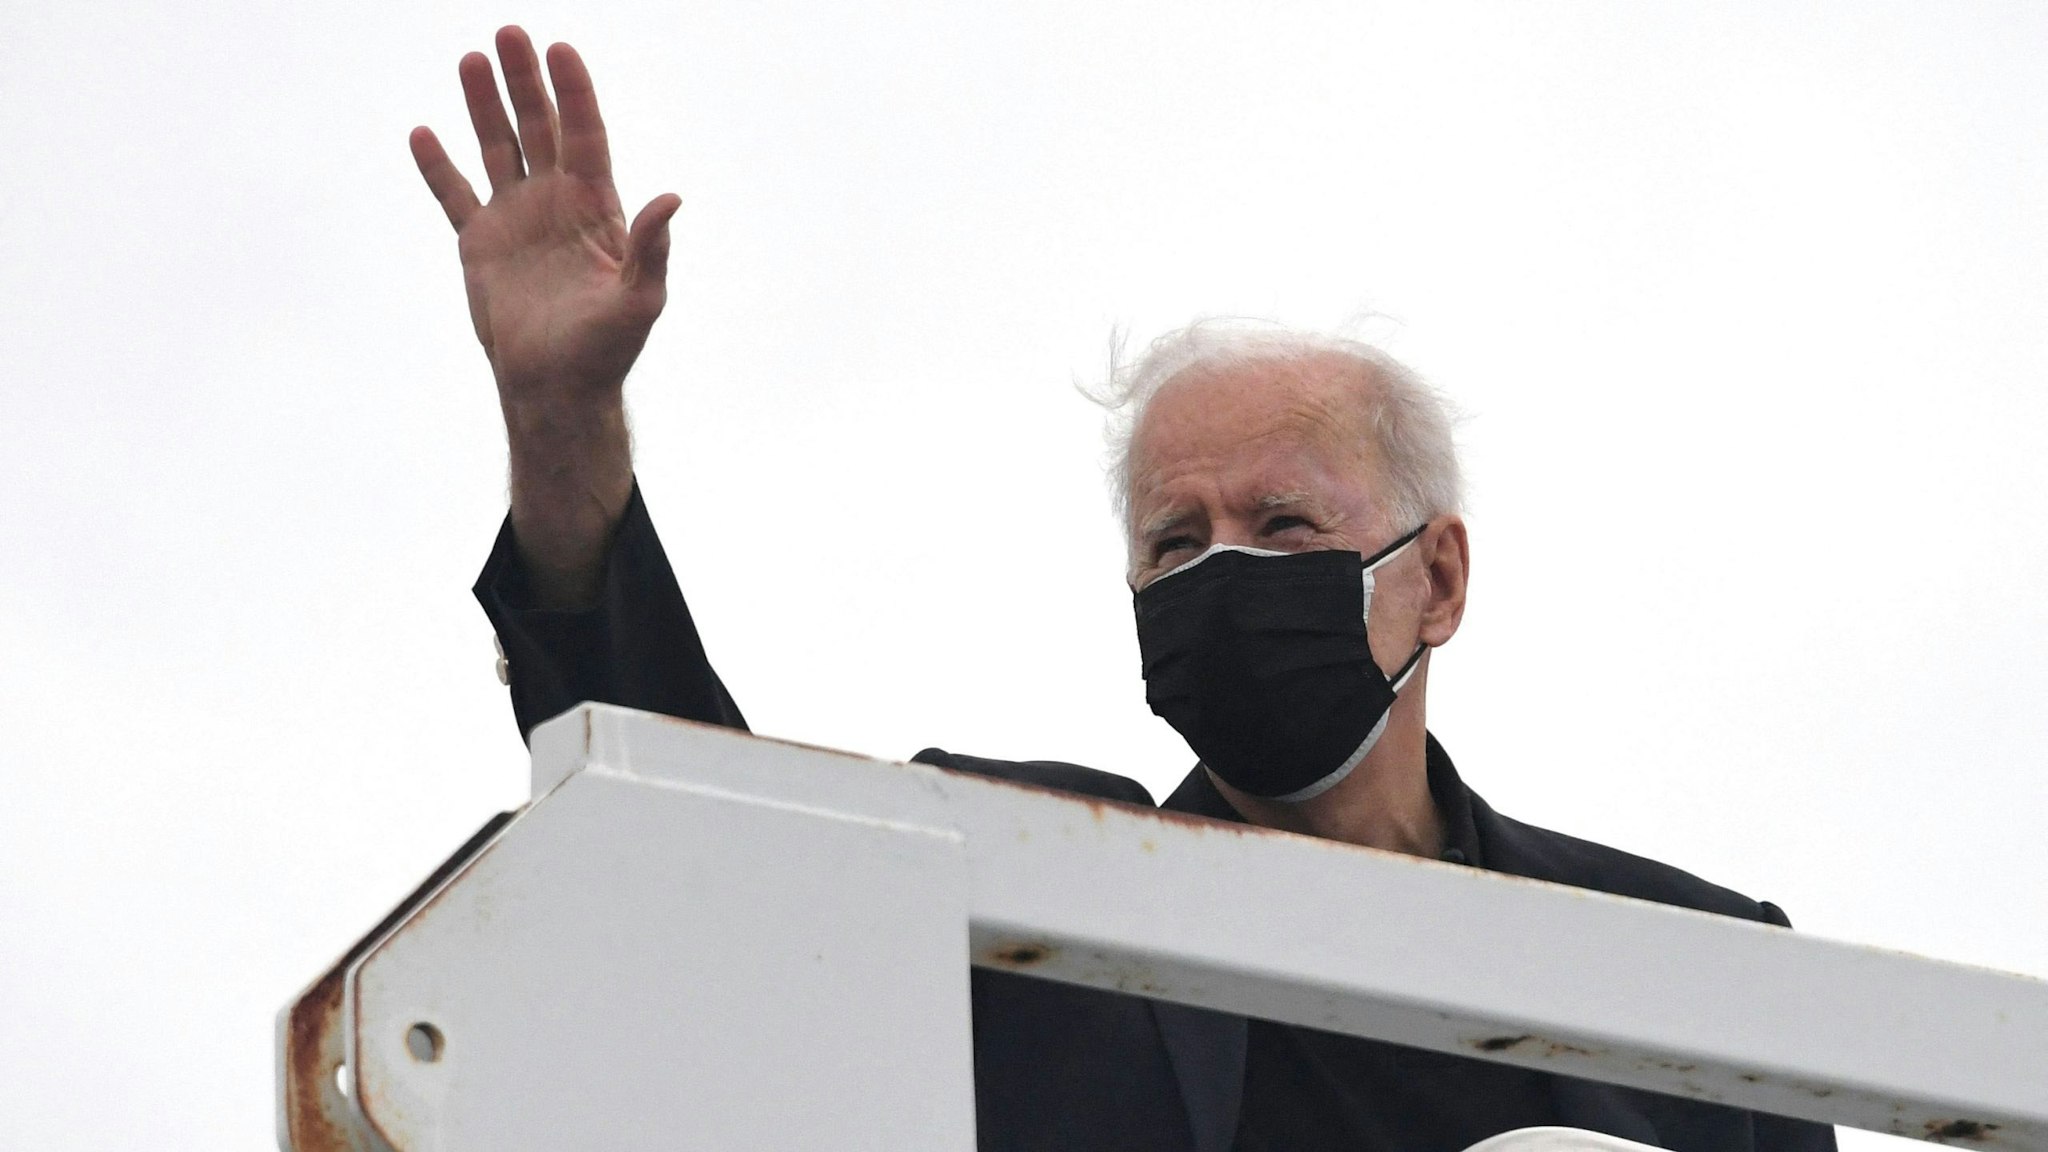 US President Joe Biden waves before boarding Air Force One after spending the weekend in Wilmington, at New Castle airport in New Castle, Delaware on March 28, 2021.